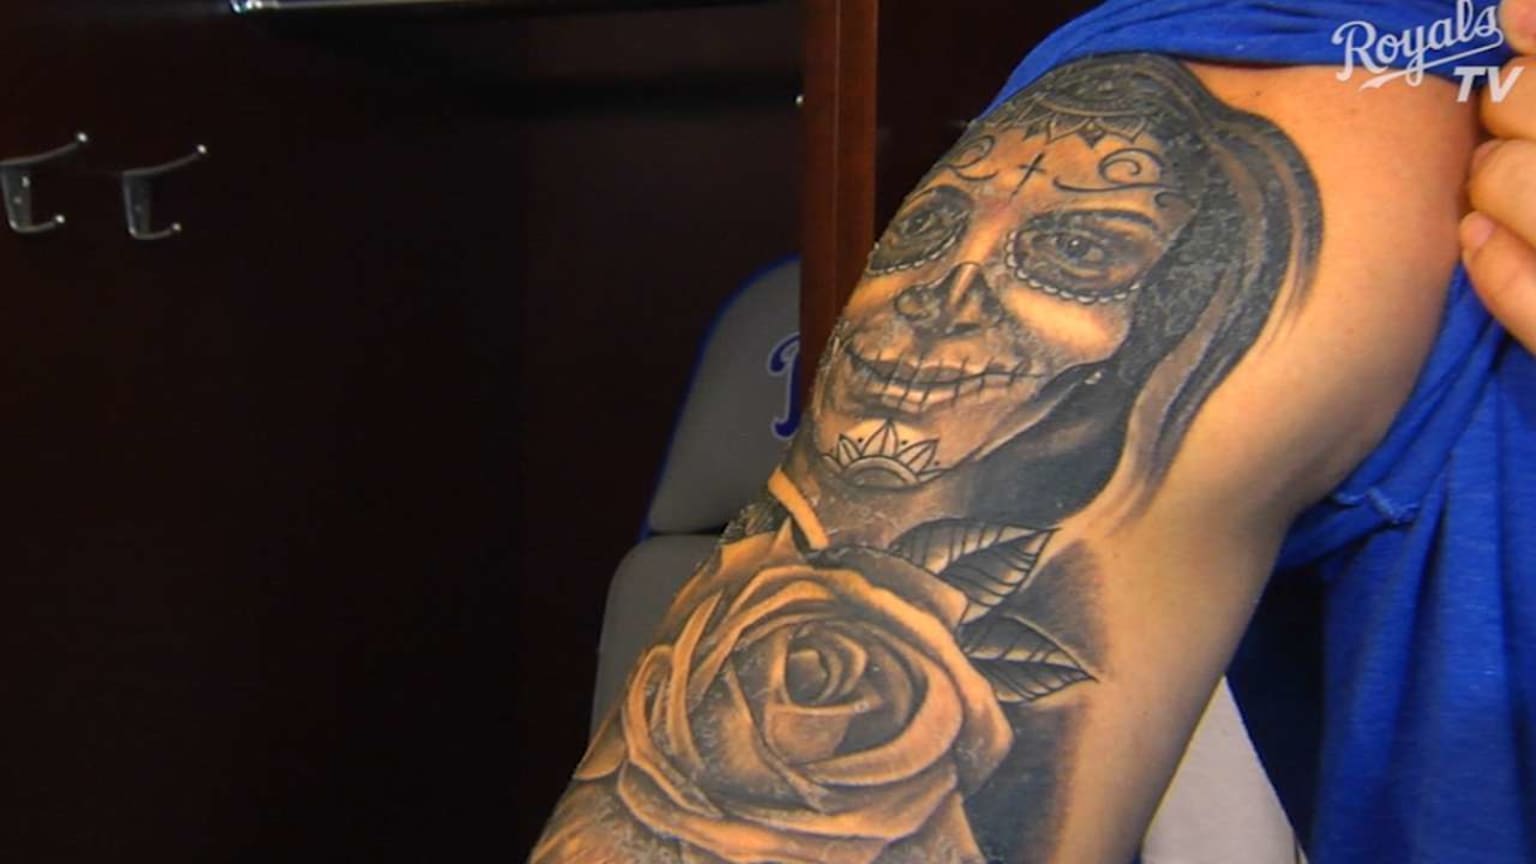 Orlando honors wife with tattoo, 02/16/2017